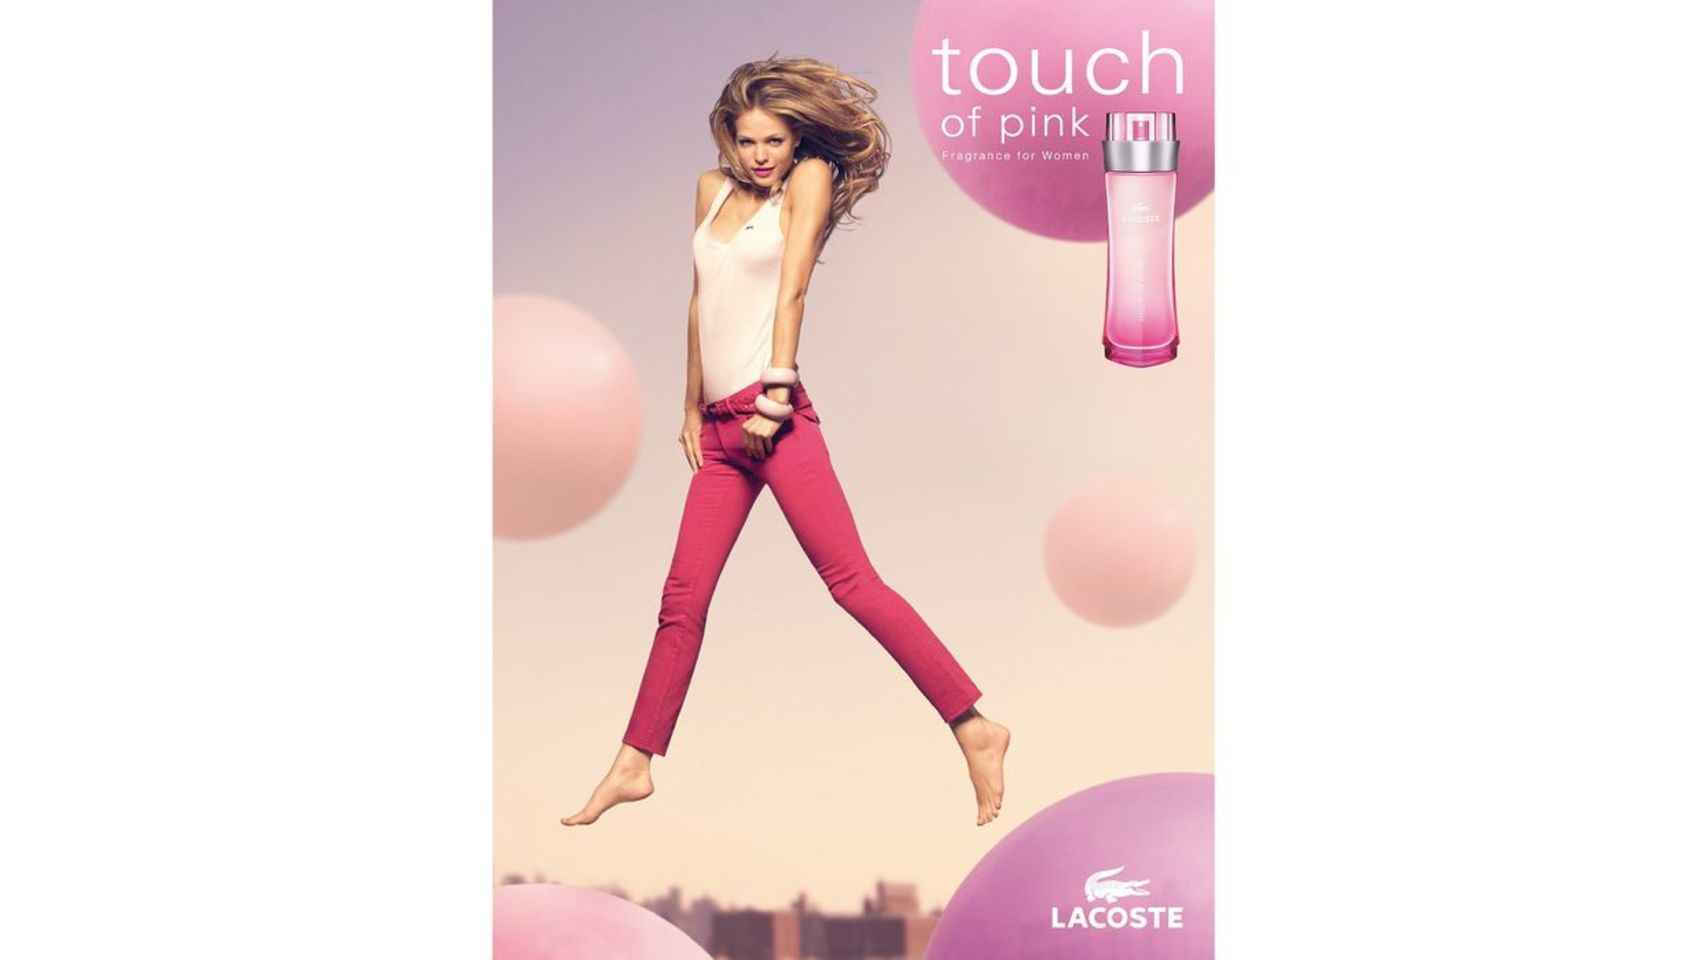 Touch of pink (fragancia para mujer) de Lacoste.